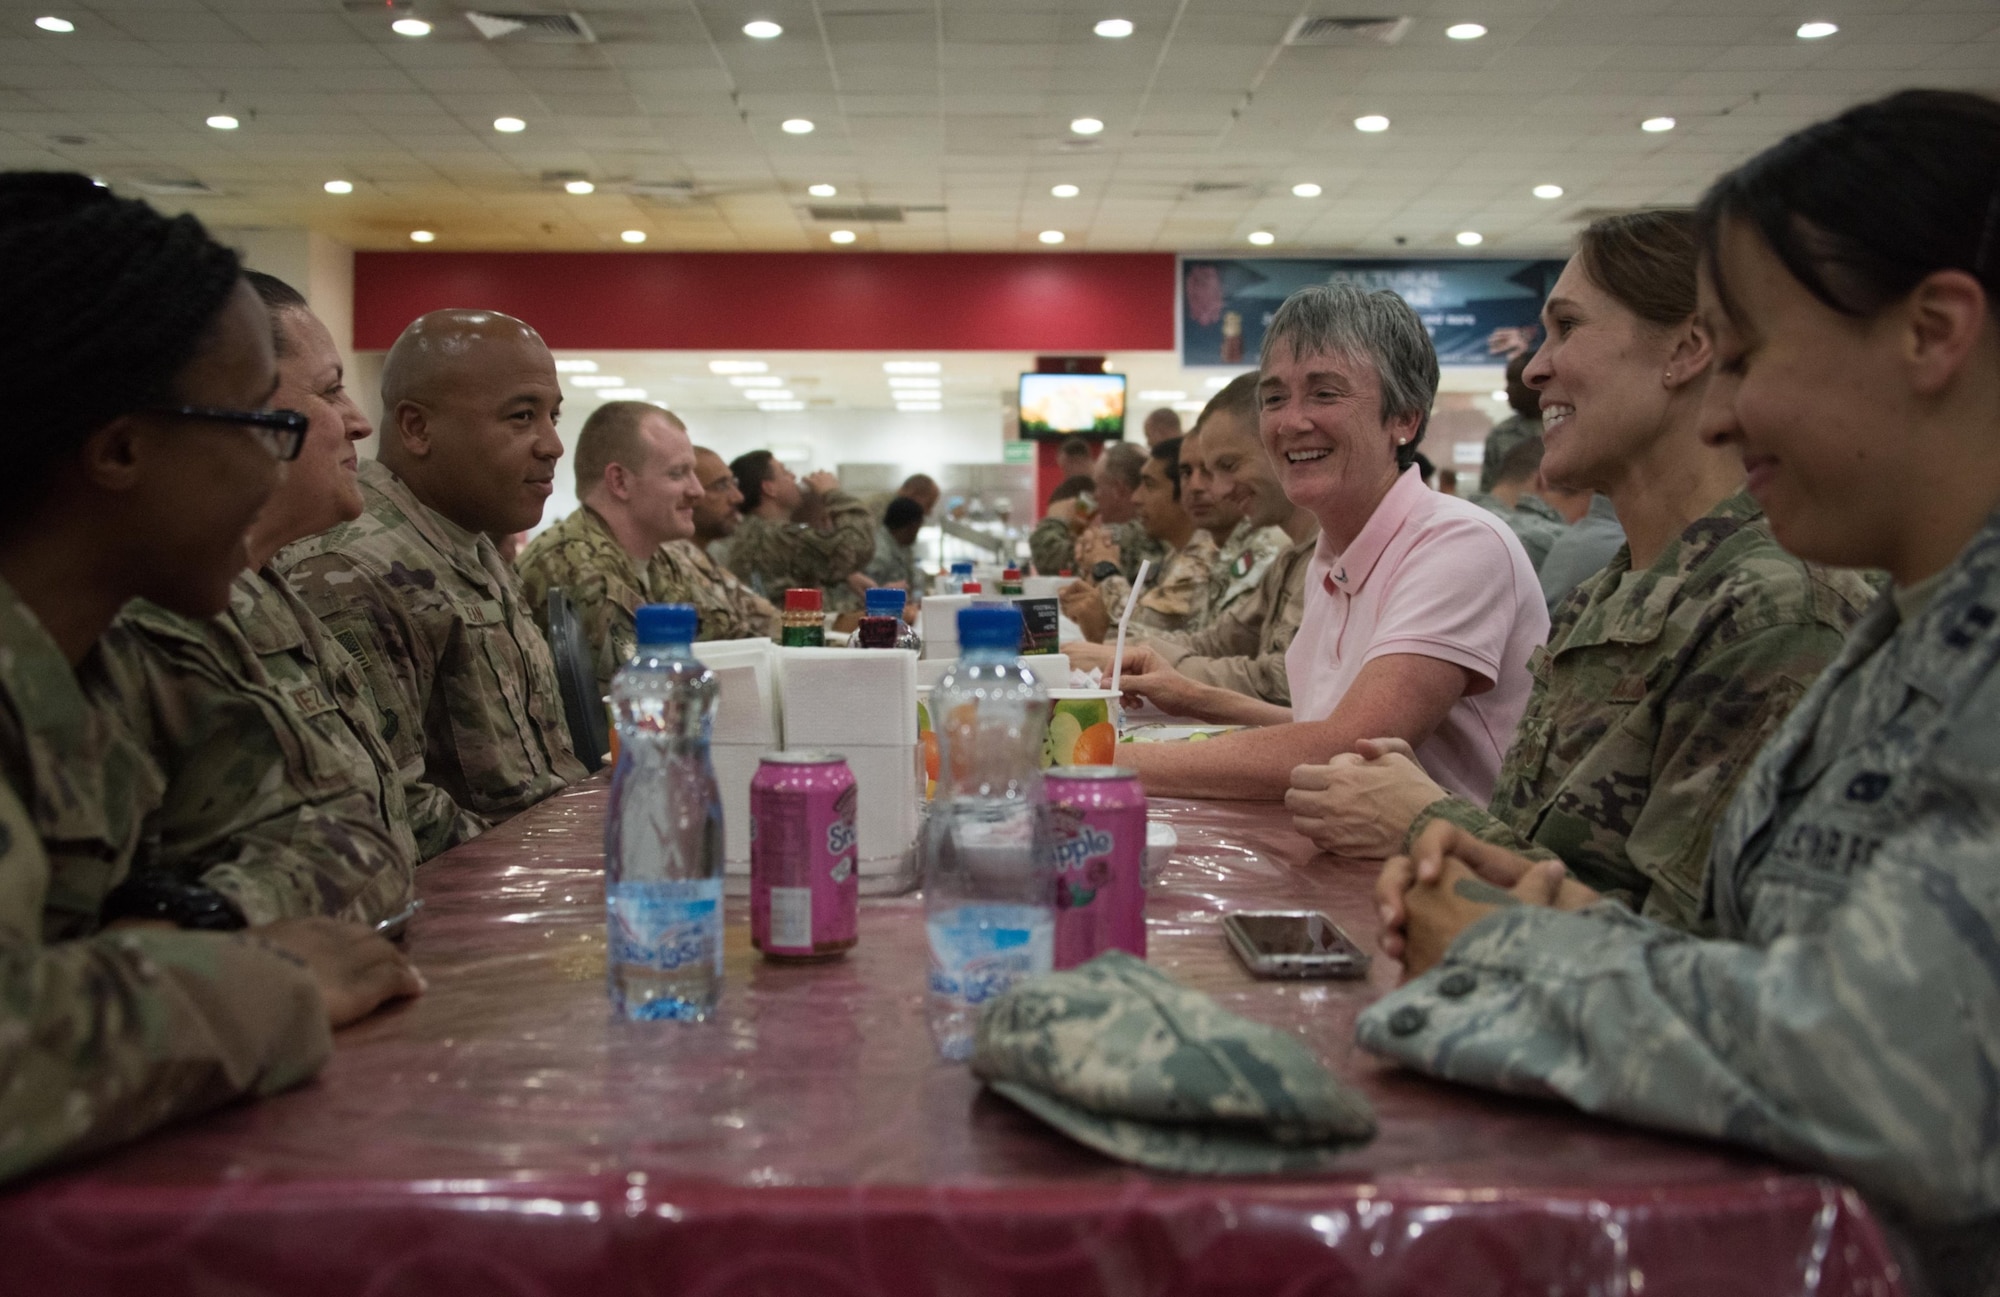 Wilson traveled with Air Force Chief of Staff Gen. David L. Goldfein, visiting deployed Airmen assigned to the U.S. Central Command area of responsibility.